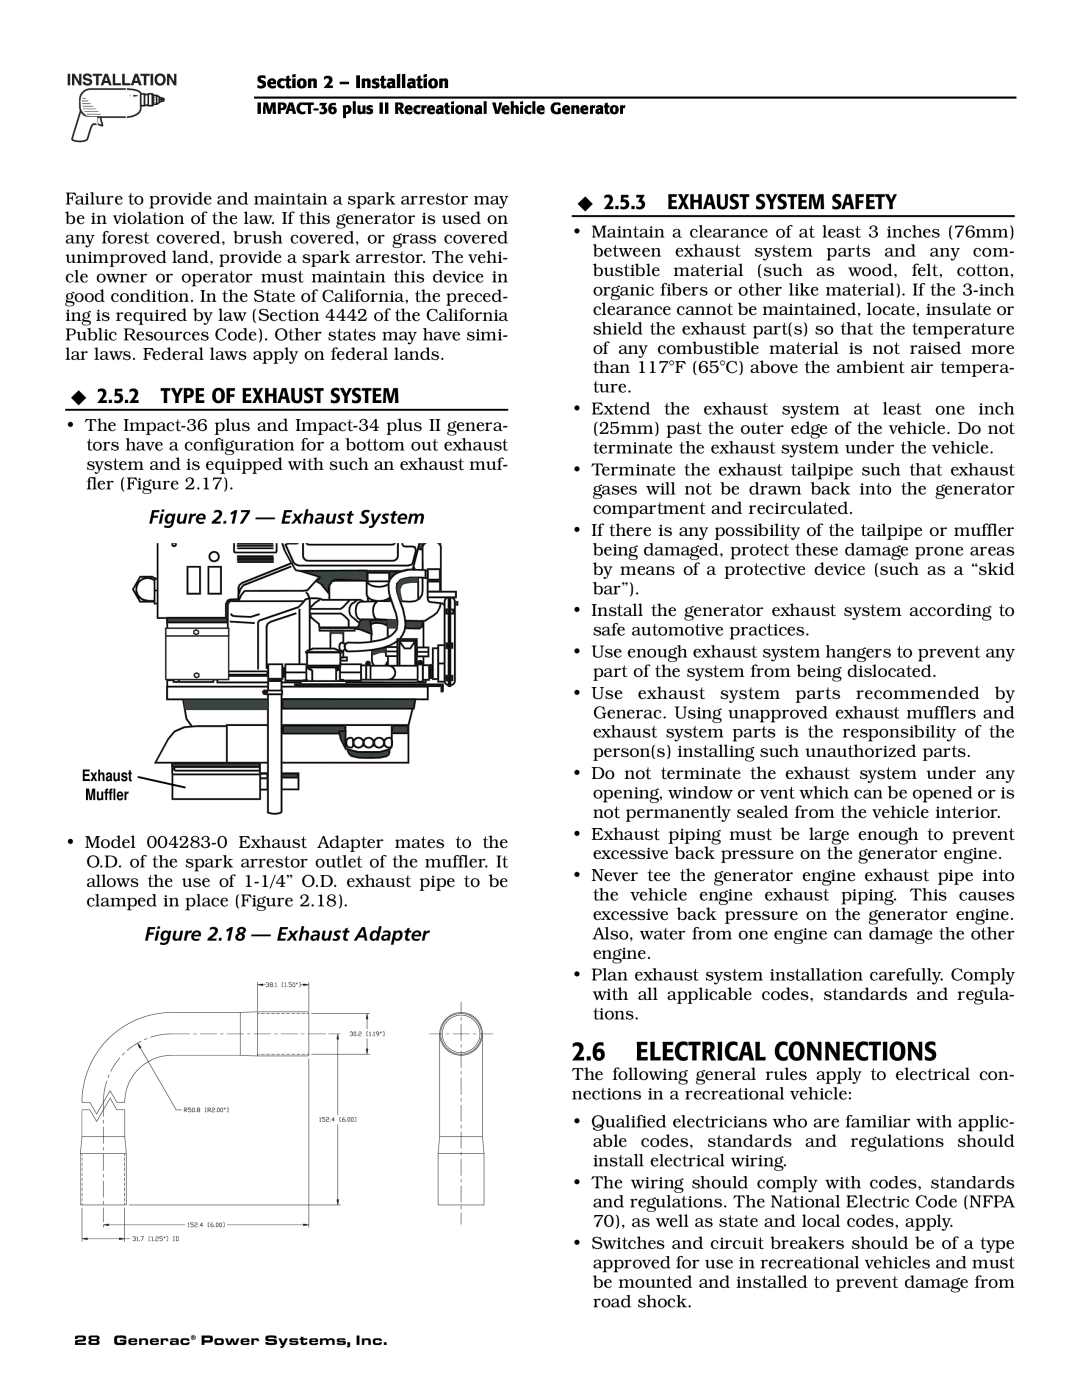 Generac 00941-3 owner manual 2.6ELECTRICAL CONNECTIONS, Type Of Exhaust System, Exhaust System Safety, 17 - Exhaust System 